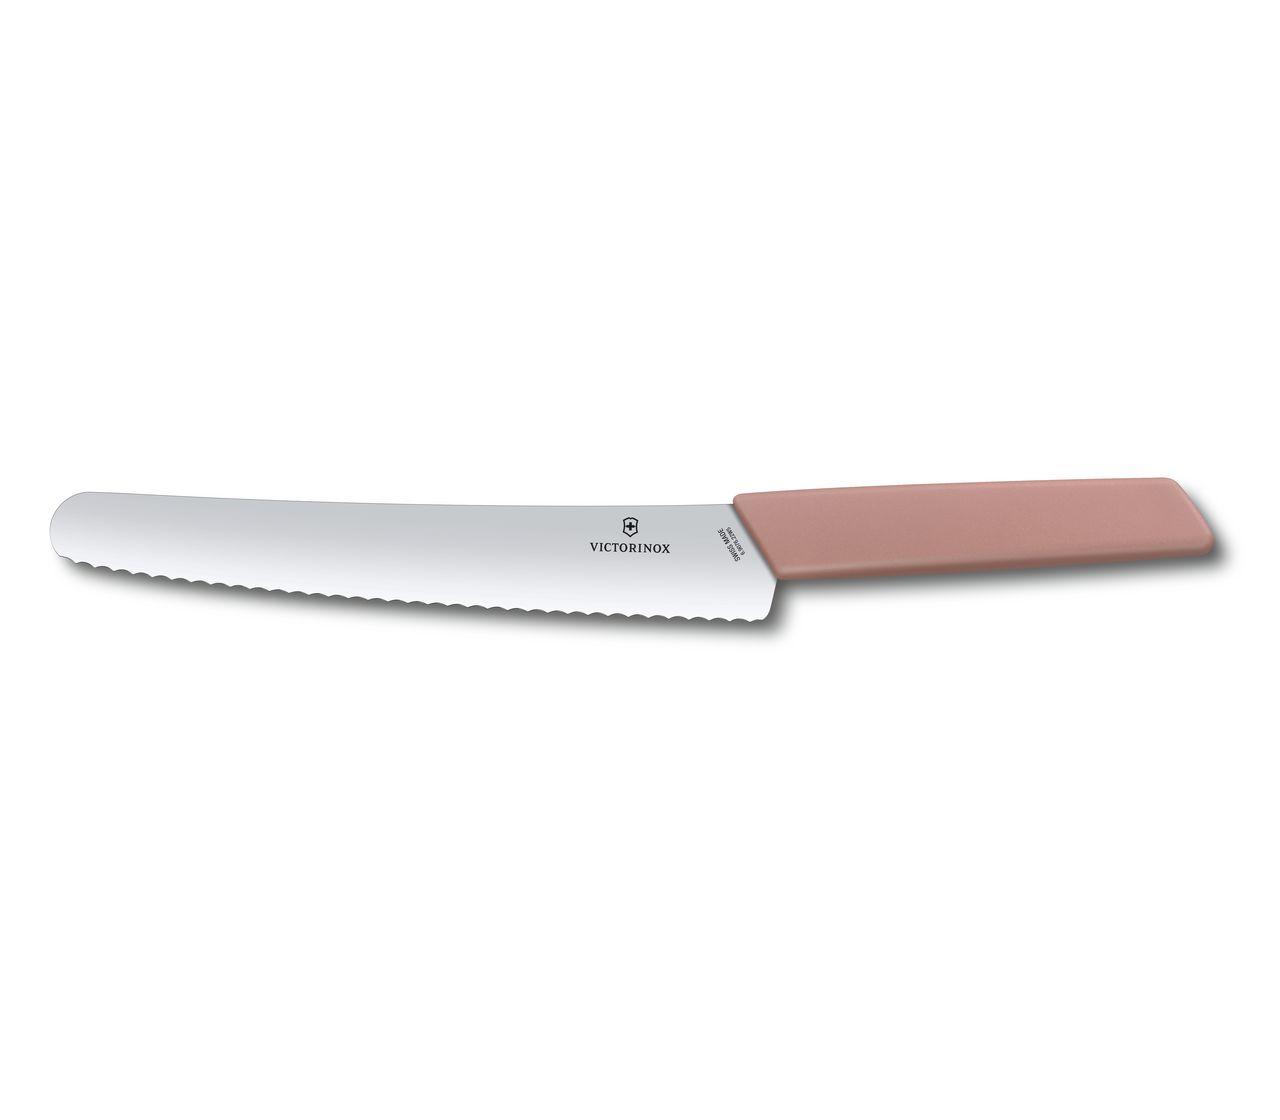 Swiss Modern Bread and Pastry Knife-6.9076.22W5B